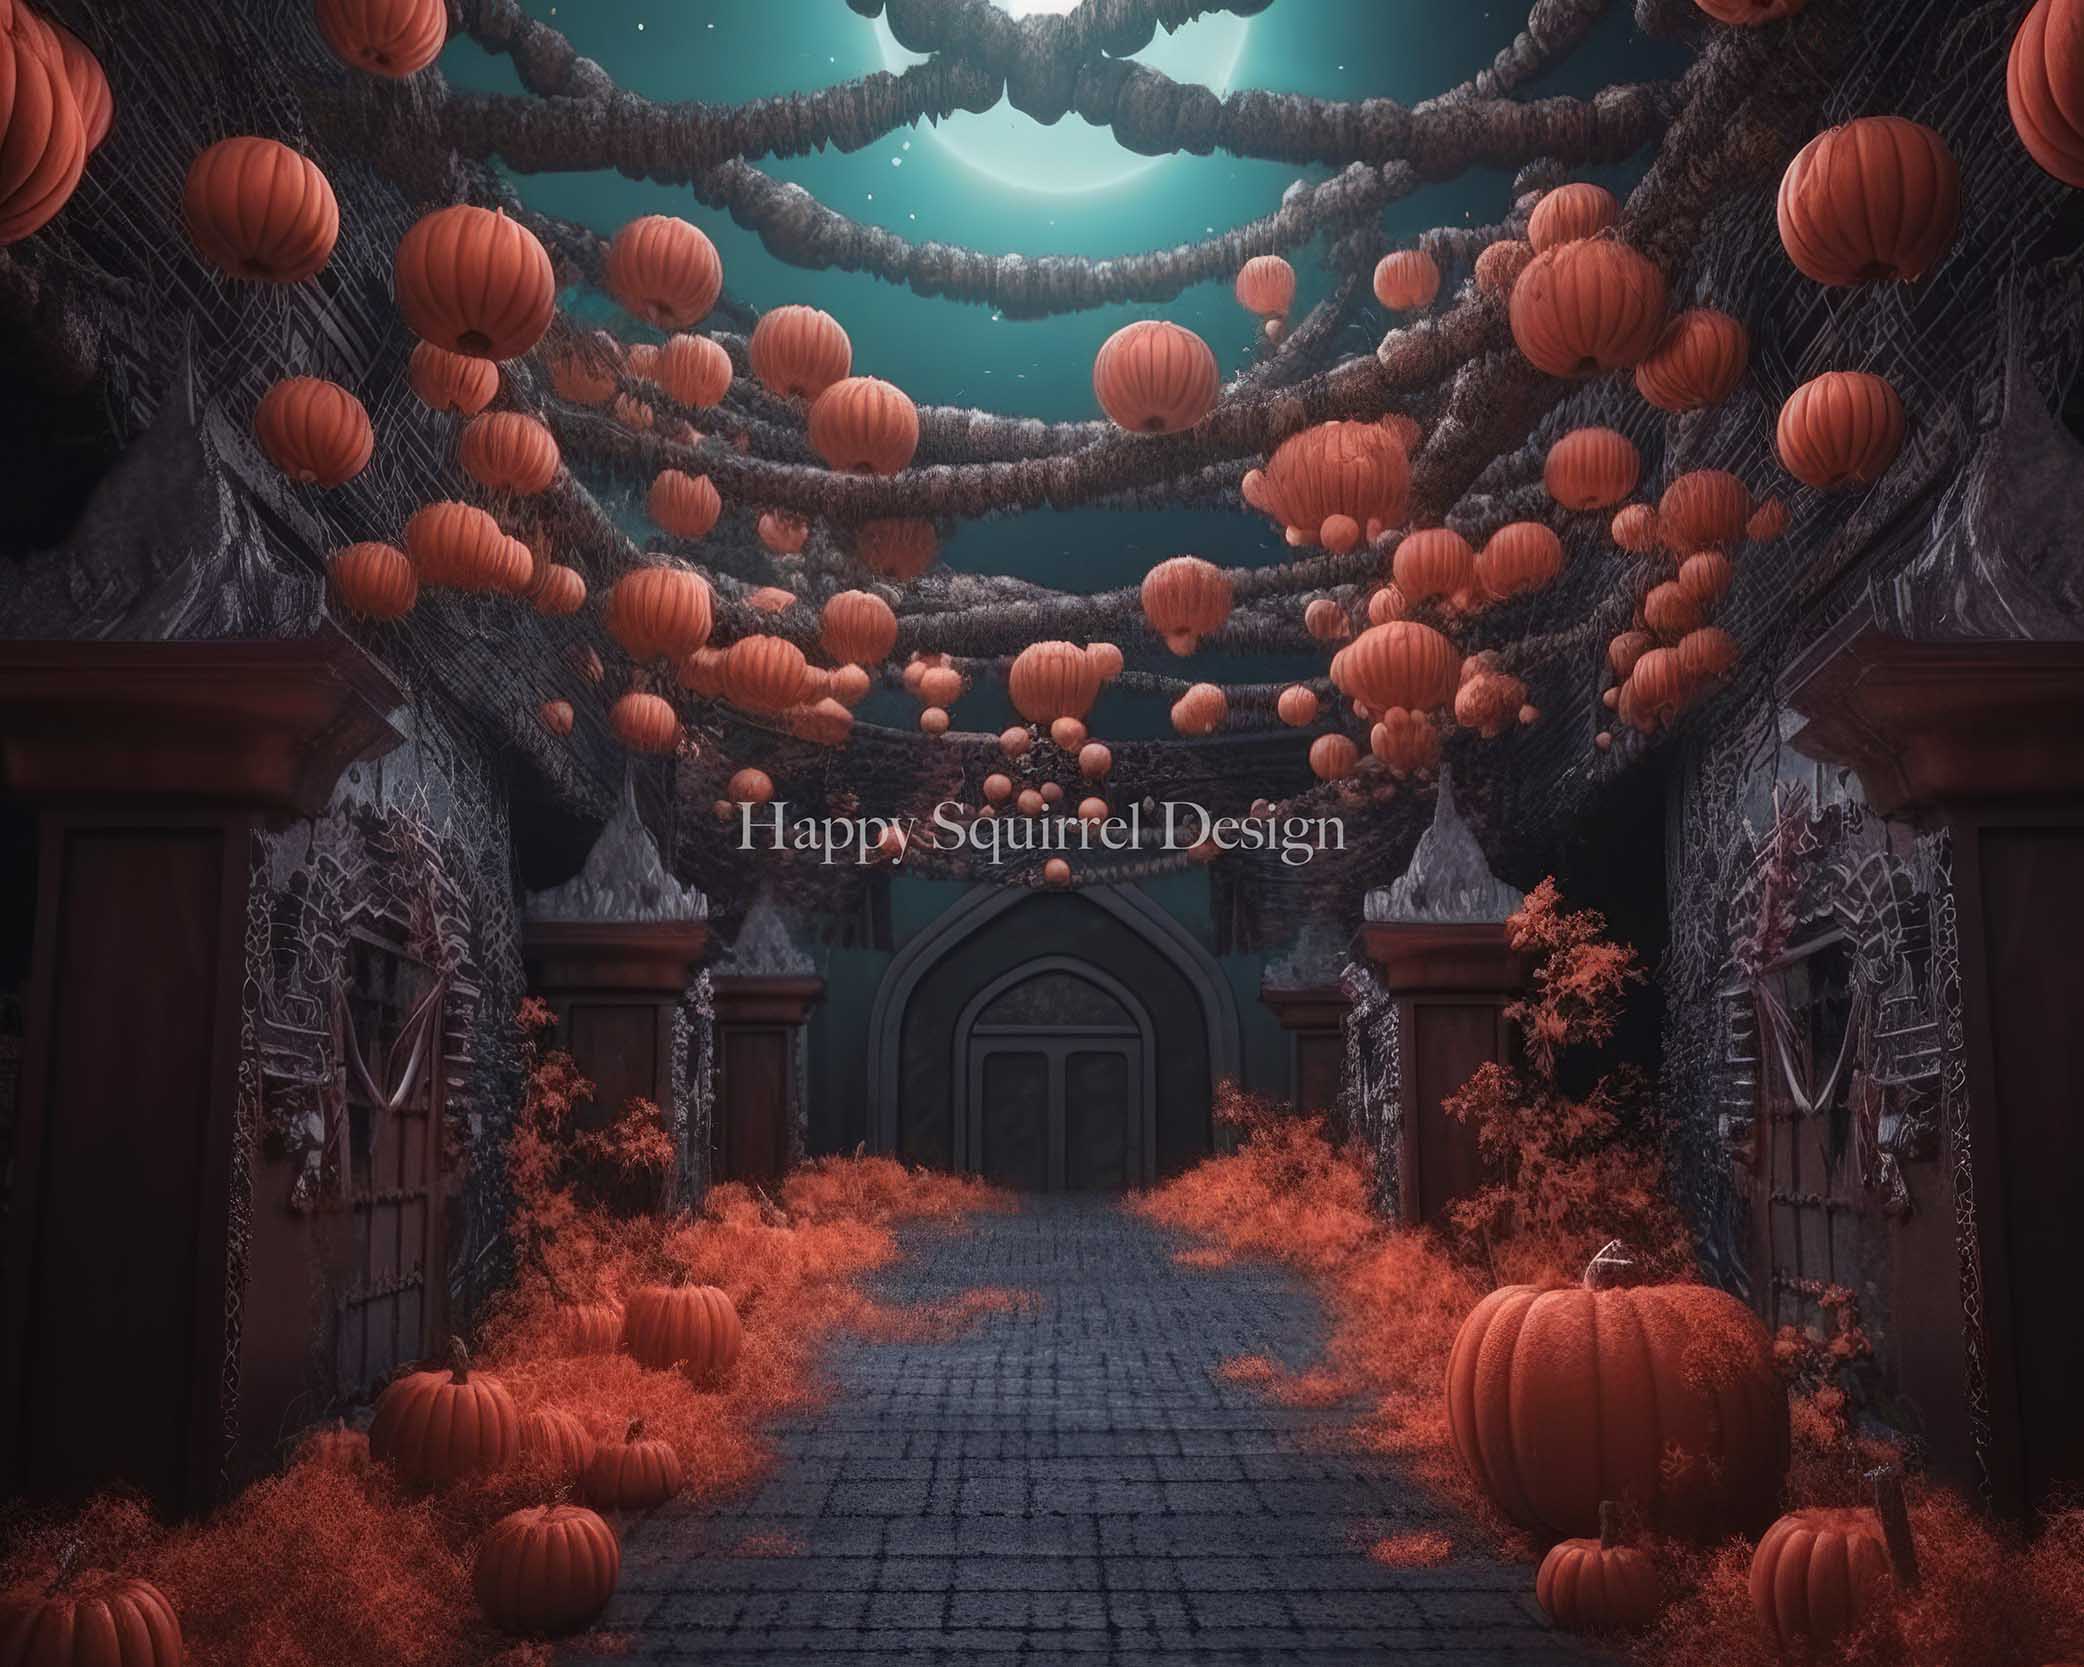 Kate Halloween Streaming Pumpkins Backdrop Designed by Happy Squirrel Design